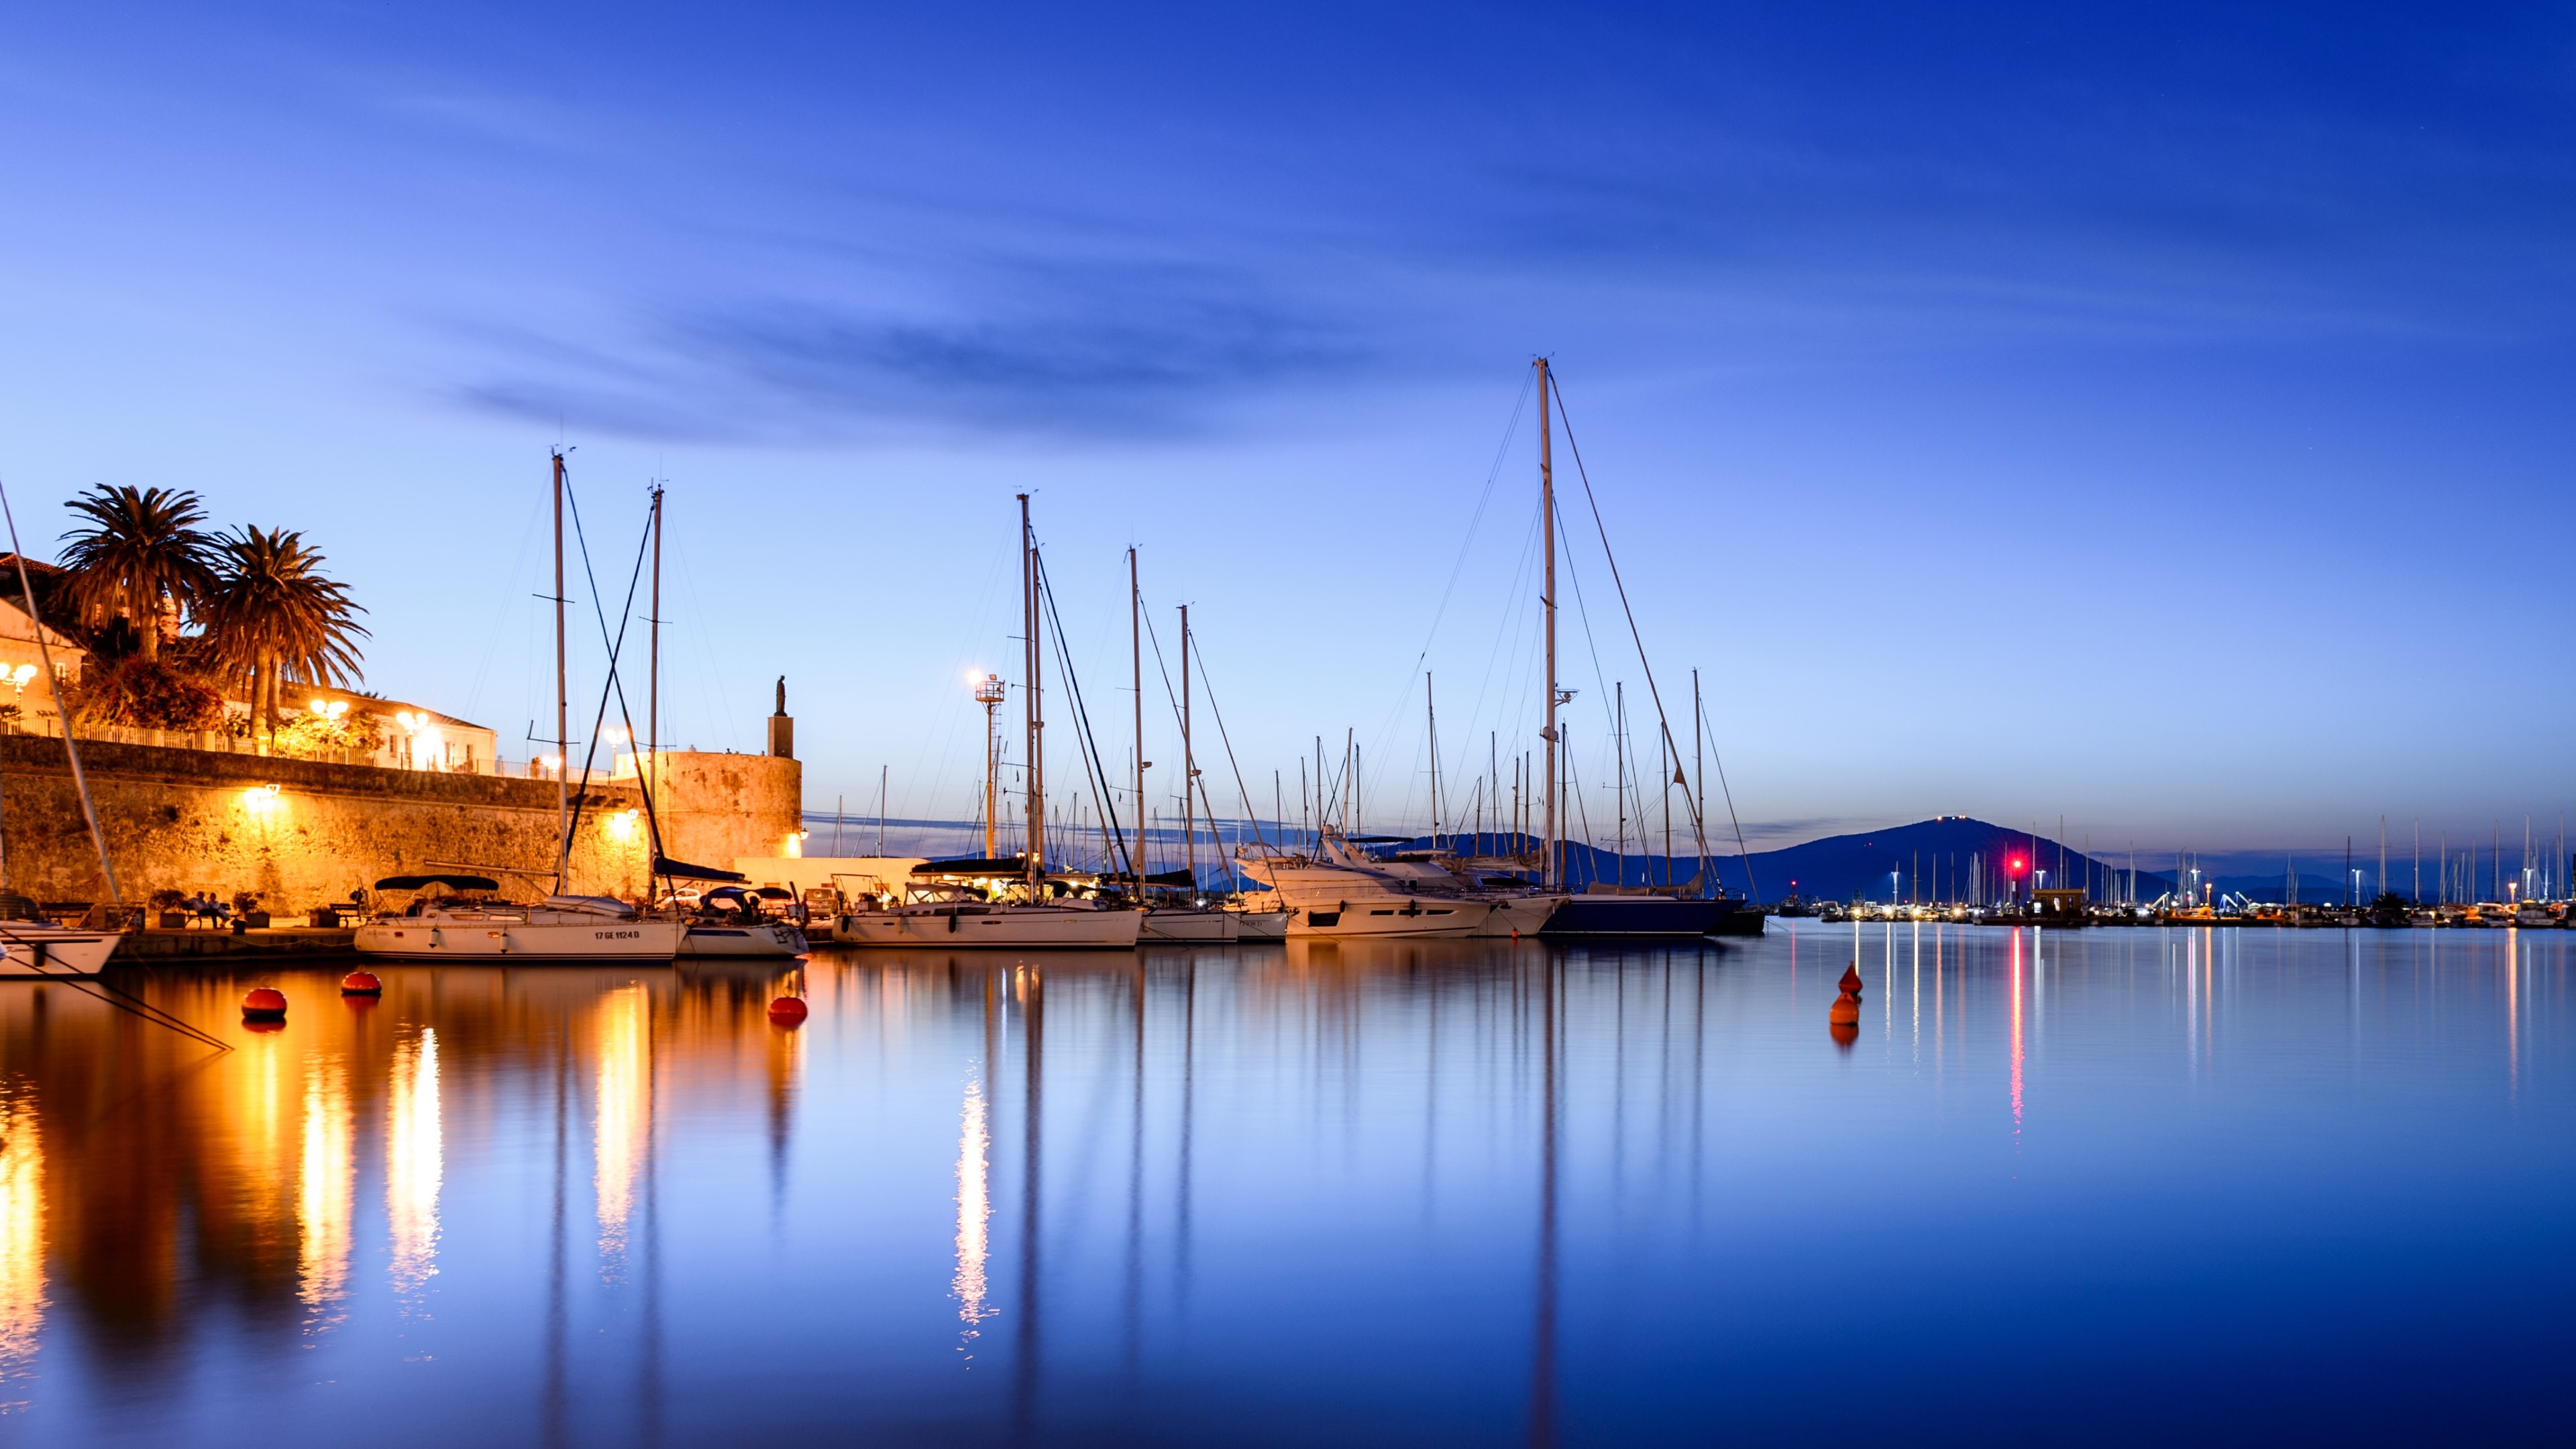 Hd Wallpapers 1080p For Galaxy Grand - Sardinia Alghero , HD Wallpaper & Backgrounds